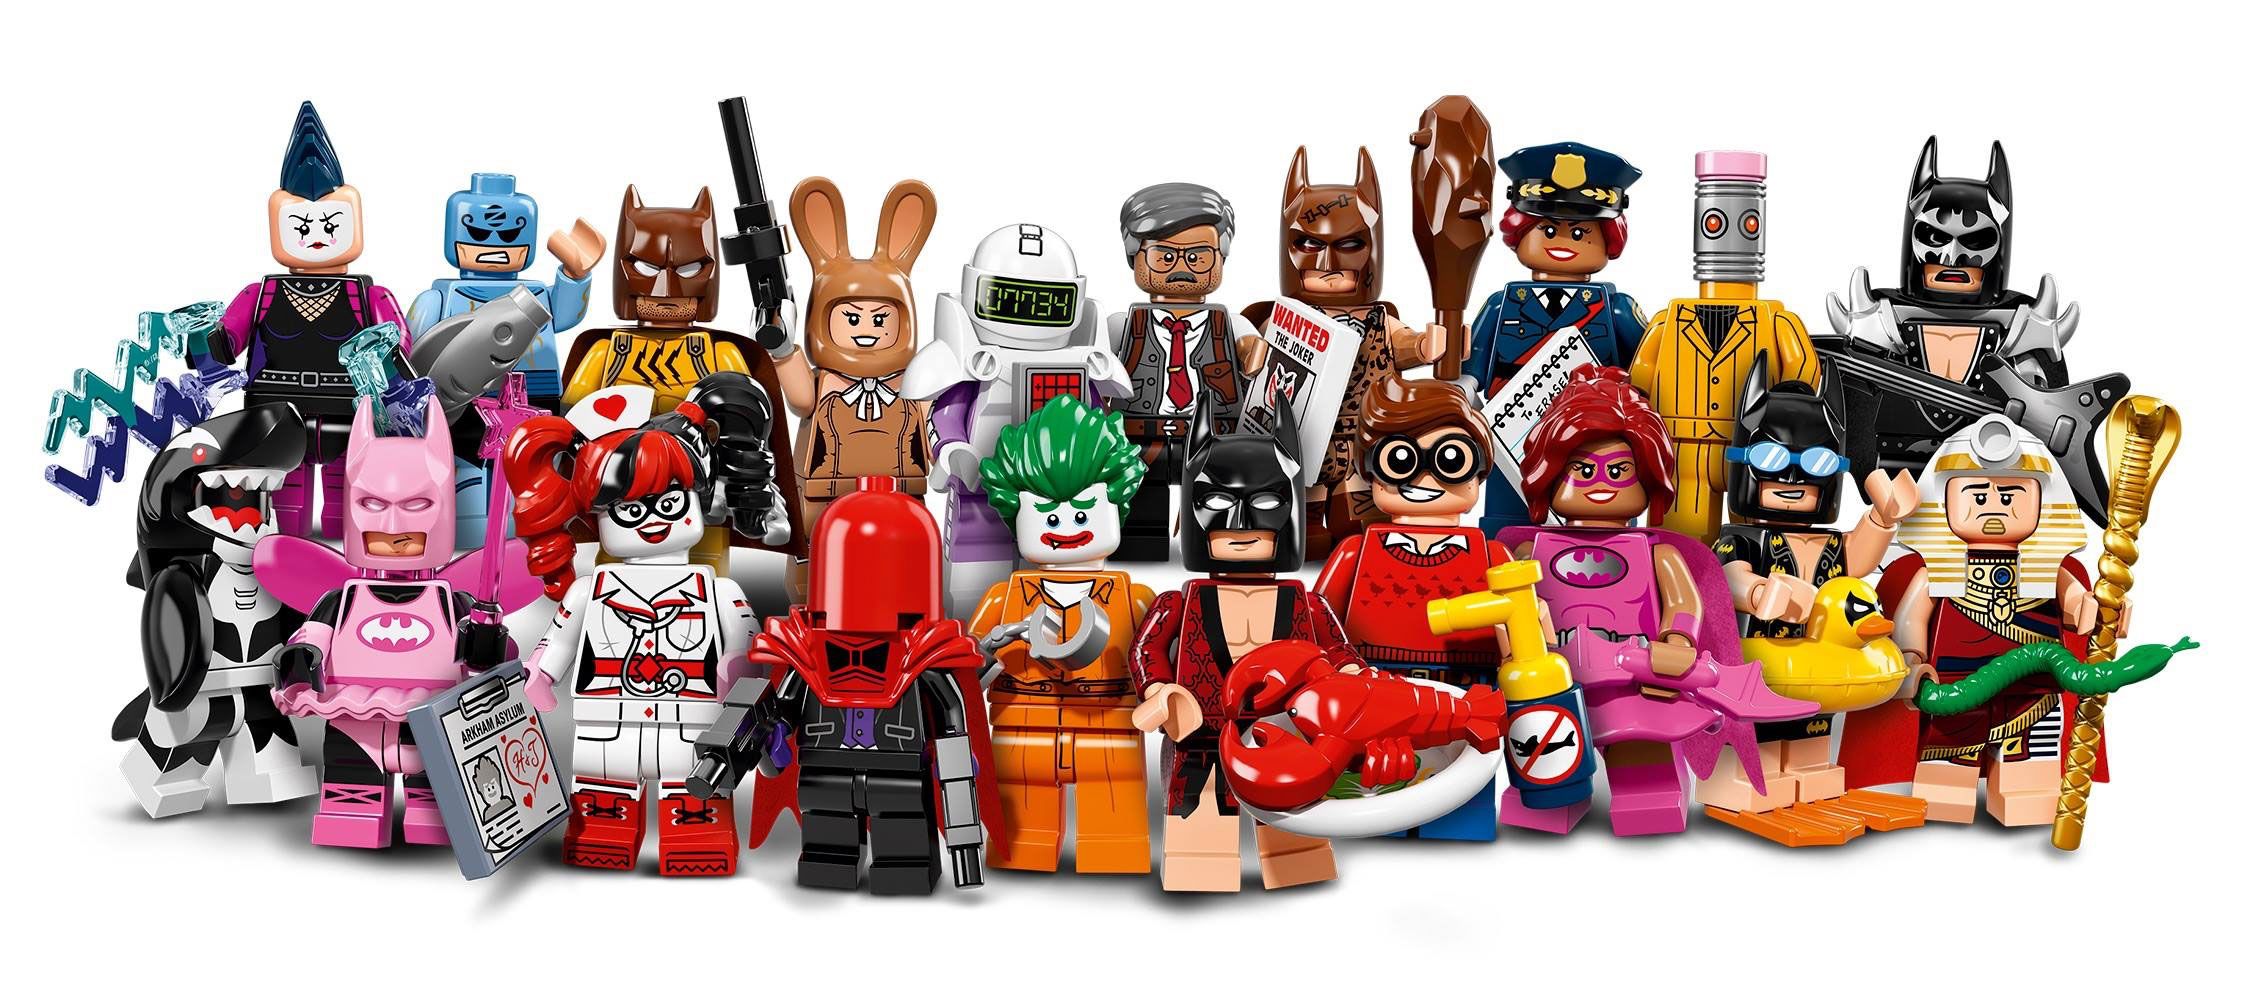 You need to check out these 20 AMAZING new LEGO Batman Minifigures